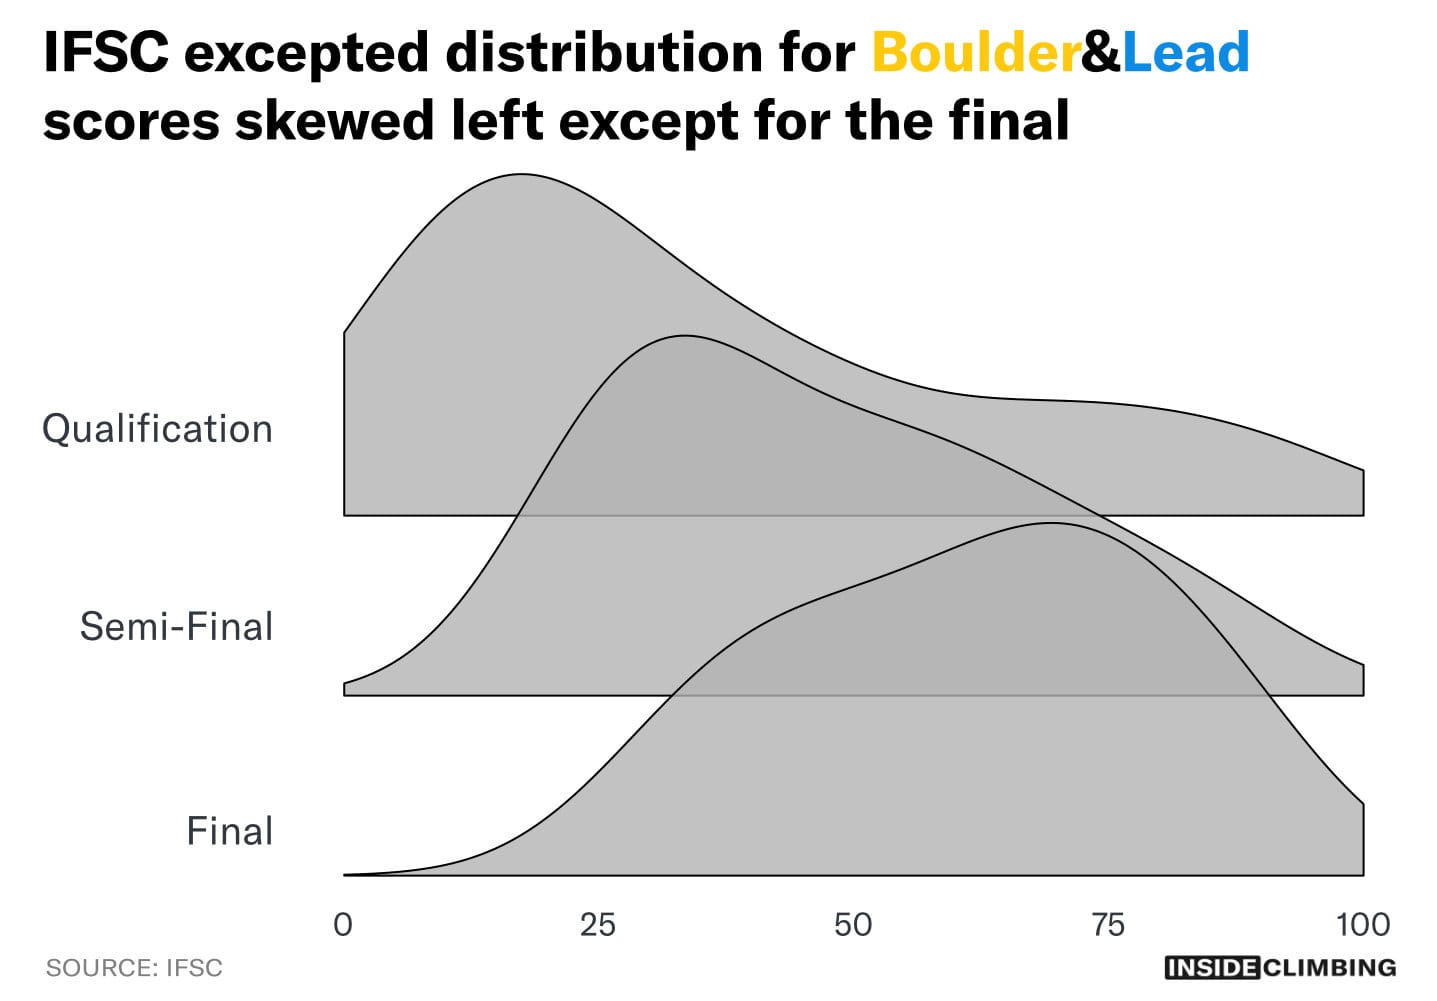 IFSC expected distribution of points skew left for qualification and semi-final rounds and right for the final.